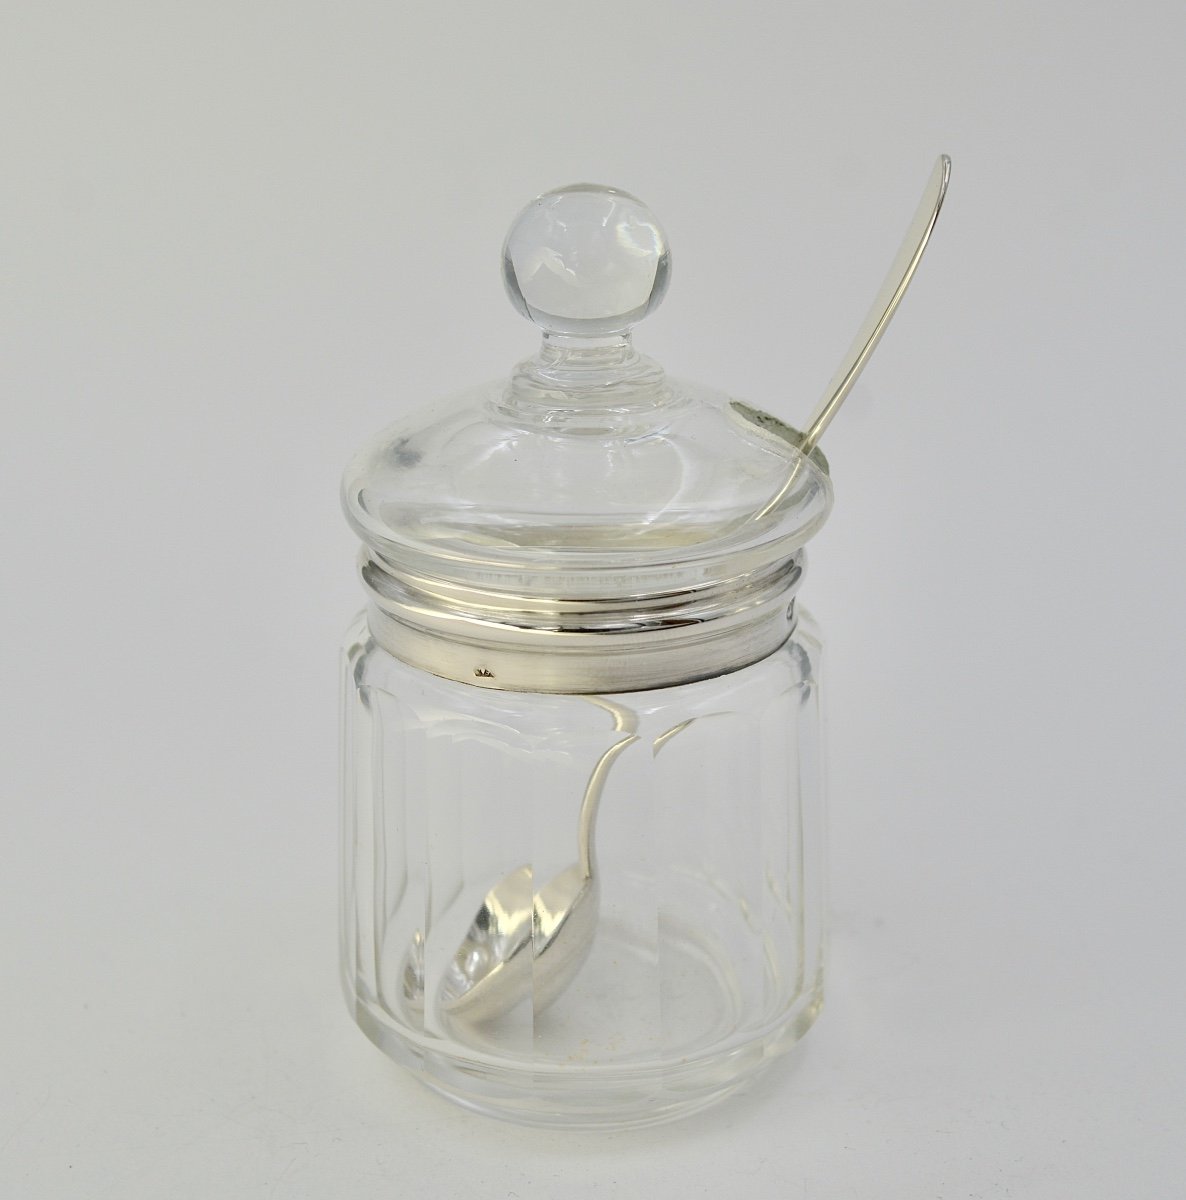 Mustard Pot In Glass And Silver, France Early 20th Century -photo-2